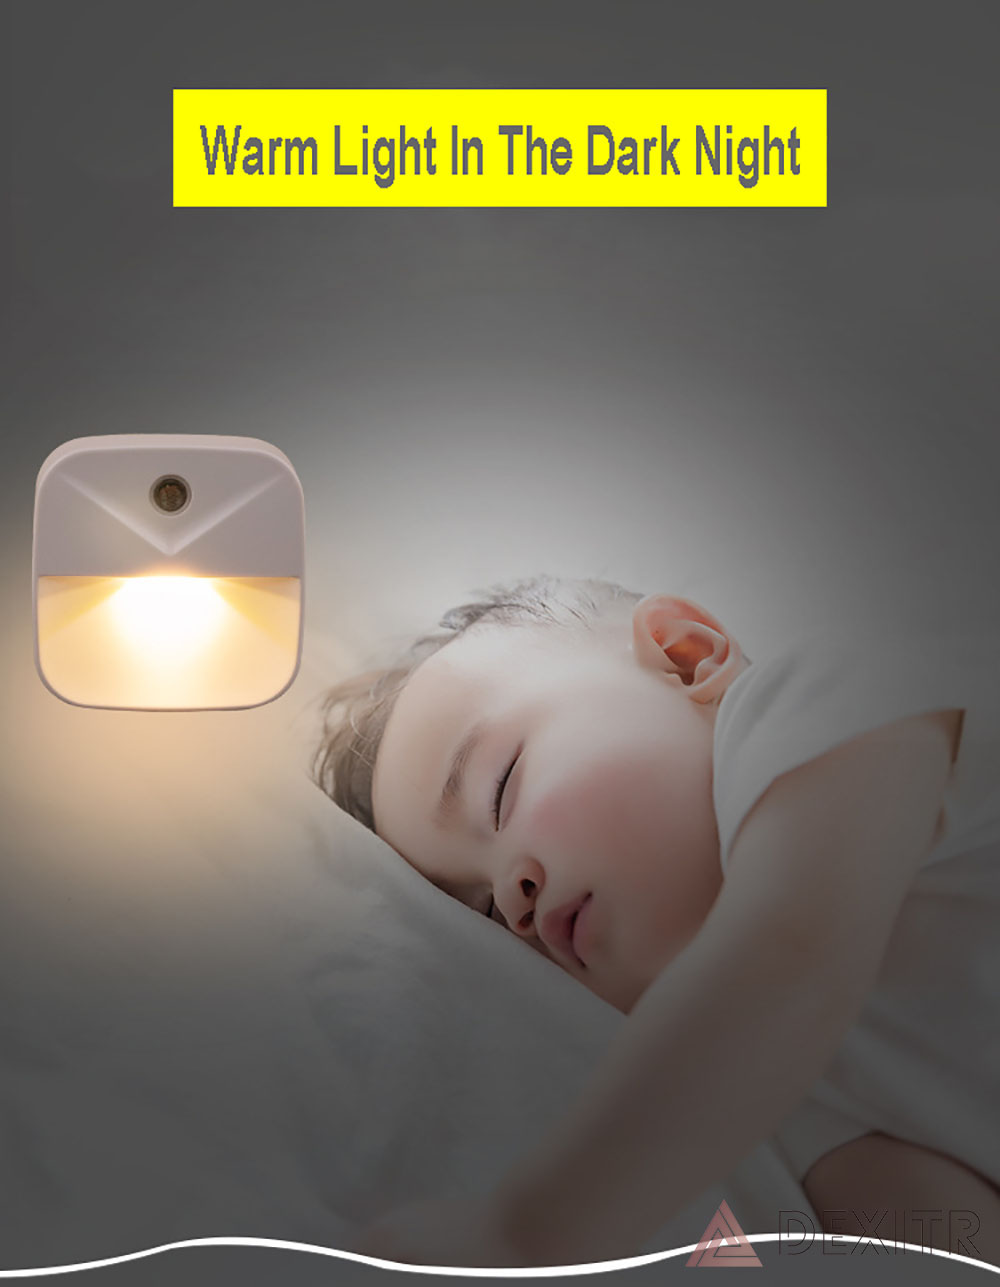 This portable soft light night light is comfortable to the eyes with its indirect light design. Equipped with an auto motion sensor to turn on the light when movement is detected at night. Perfect night light for kid's bedrooms and the rest of the house. Super energy saver! The nightlight is perfect for the hallway, bathroom, bedroom, kitchen, living room, nursery, kids room or anywhere you need some extra light Bright enough to see where you're going in the dark without turning on other lights, but not so bright as to blind you Offset plugs and compact size, the nightlight does not block the second outlet Built-in sensitive light sensor, the nightlight automatically turns on at dusk and off at dawn Night light uses 4pcs long-life LED, lights up to 8hrs each day, only 2.2 kWh needs per year Use 100% ABS which is fire-resistant Easily See In The Dark Solve all your "can't see in the dark" problems! Never trip again on your bathroom break in the middle of the night. DEXITR Night Light makes your path visible without having to turn on any other lights. All Outlets Stay Accessible Offset plugs should be a no-brainer on night lights yet some products still have it centered. Not ours! We made sure you can still use your other outlets even for laptop plugs! No Switch, Just One Sensor With its ambient light sensor, you'll never have to remind yourself to close these lights in the morning. It gradually turns on as it gets dark outside, and gets dimmer as the environment brightens. Energy Efficient With just 0.5 watts per piece, these lights will replace your regular lamps and will pay for themselves in less than a year! The LEDs don't produce any heat so you can leave them plugged in without any hazard. Safe For You And The Environment Every product we produce undergoes strict quality control and has certifications in place to assure safety to consumers and the environment. This night light is no exception. More Than Good Lights We are a customer-driven brand committed to providing you a positively lit experience. This DEXITR light is a light-sensing night light that emanates a soft, white glow automatically at night or in low light conditions. Ideal for indoor places like a bedroom, children's room, kitchen, hallways, stairways, closets, etc. No need to push any buttons or flip a switch, just set the lighting mode and auto illuminate your living space. Wireless and portable, our led light draws minimal power (0.5w ). It is safe for use at home and around children. Specification: - Input voltage: Ac 110-220v-power consumption: 0.5w-light color: White-lifespan: 50000 hours- dimension: 2.56 x 2.56 x 1.1in/6.5 x 6.5 x 2.8cm. Allows you to get up at night, get some water, use the restroom and return to bed without turning on any main lights. You don't have to worry about turning the lights on and off around the house in the morning and evening. The smart sensor does it for you.